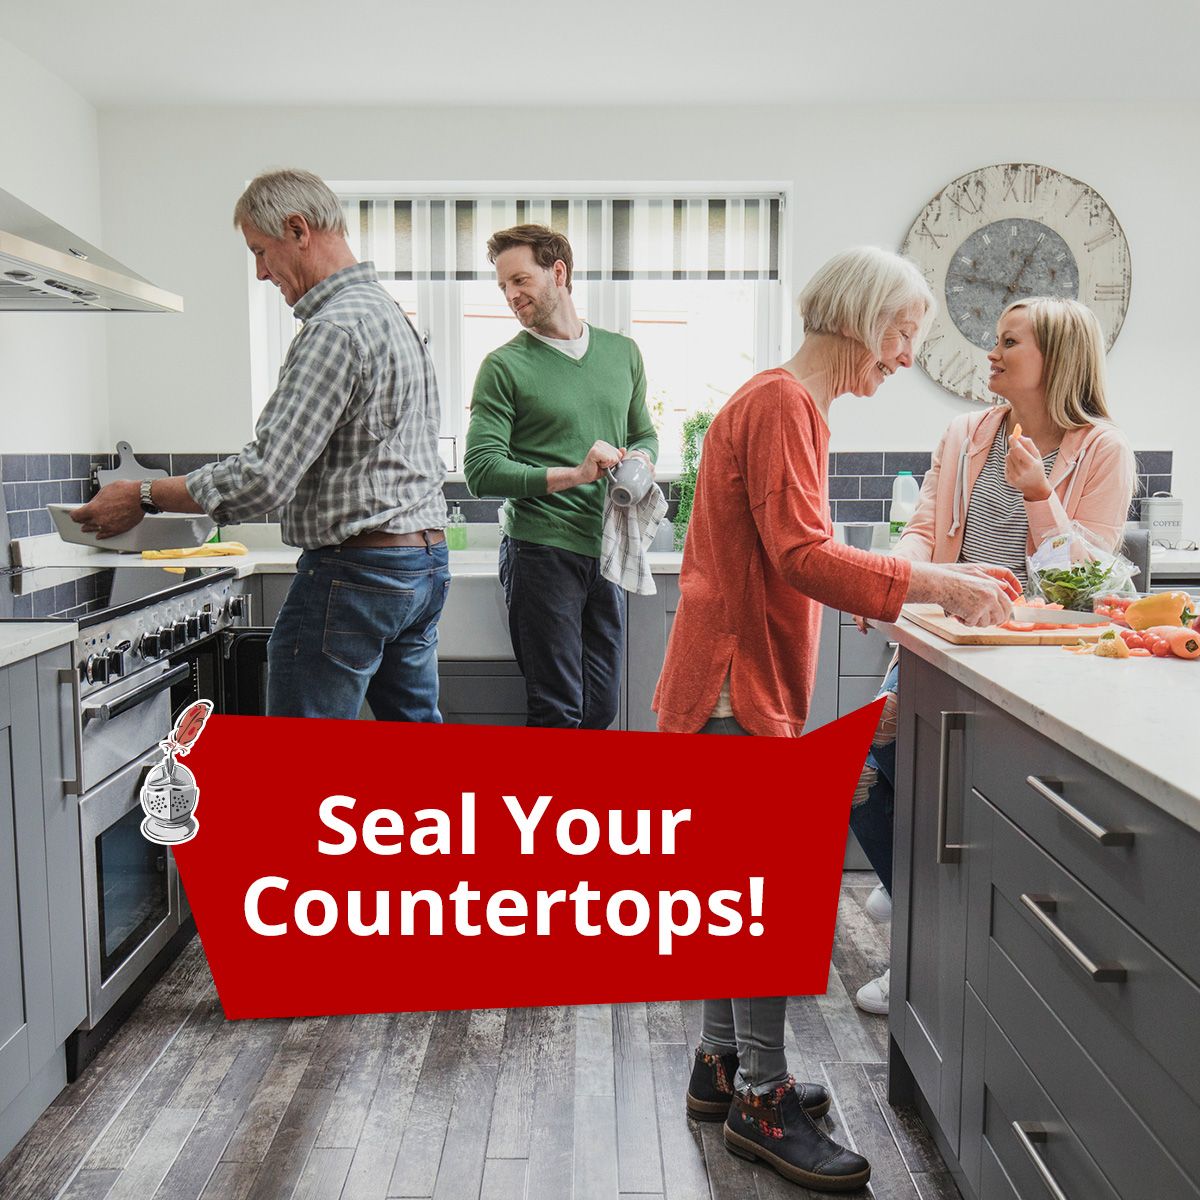 Seal Your Countertops!